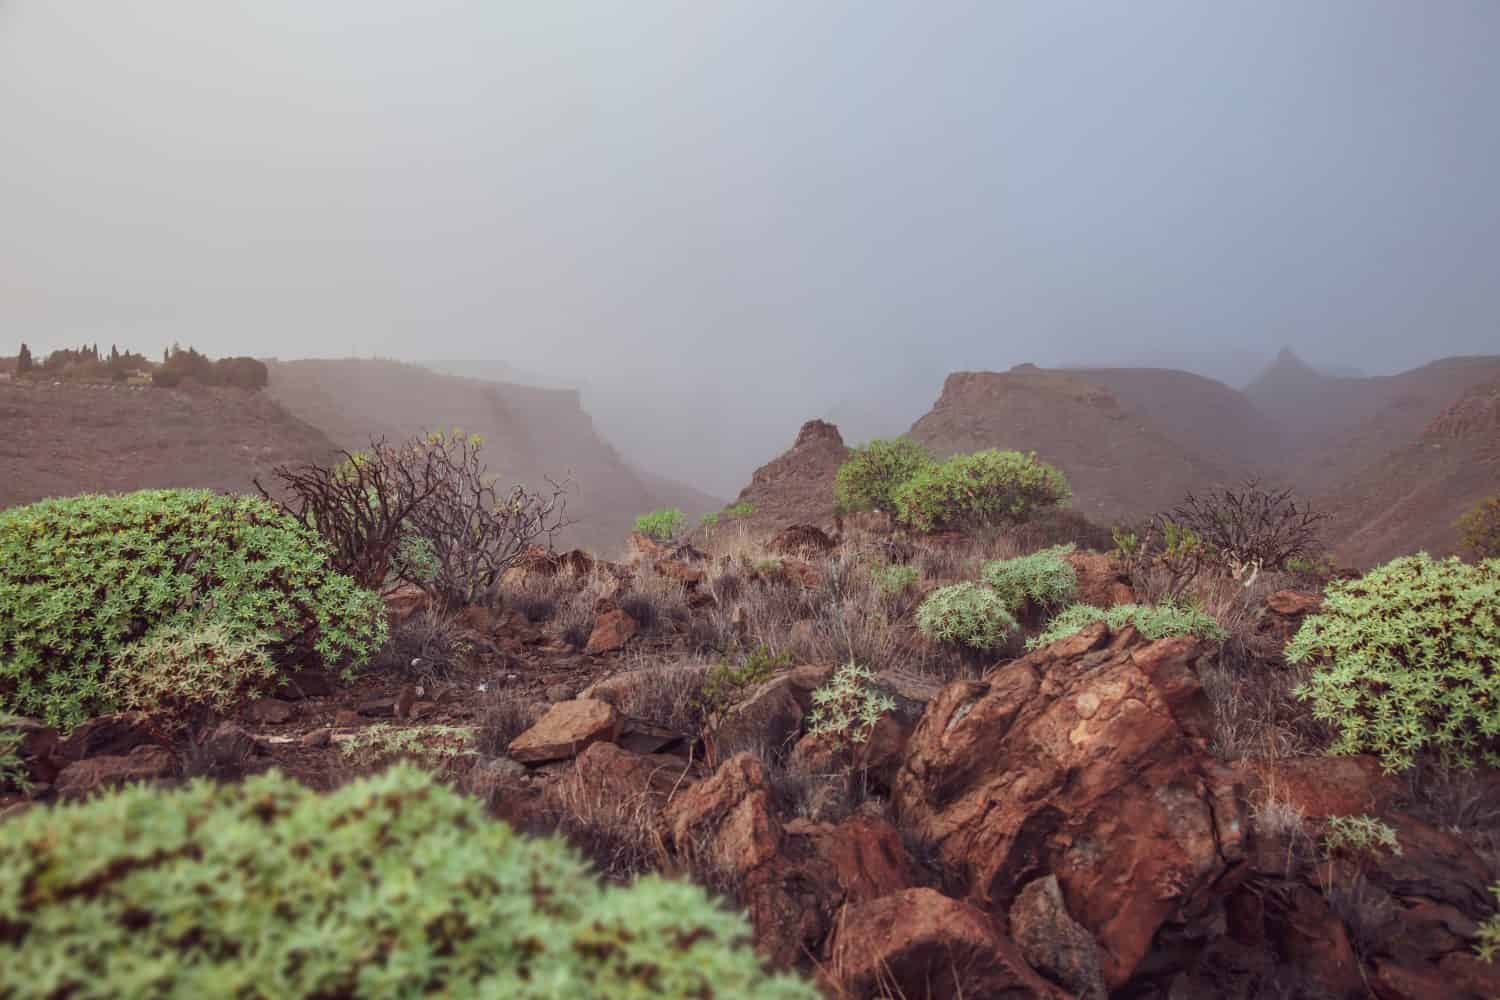 Red volcanic rocks of La Palma island in fog. Green desert plants grow on stones in the Canary Islands. Warm colors. Scenery, natural landscape. Looks like terraformed Mars, valley of the Mariner.